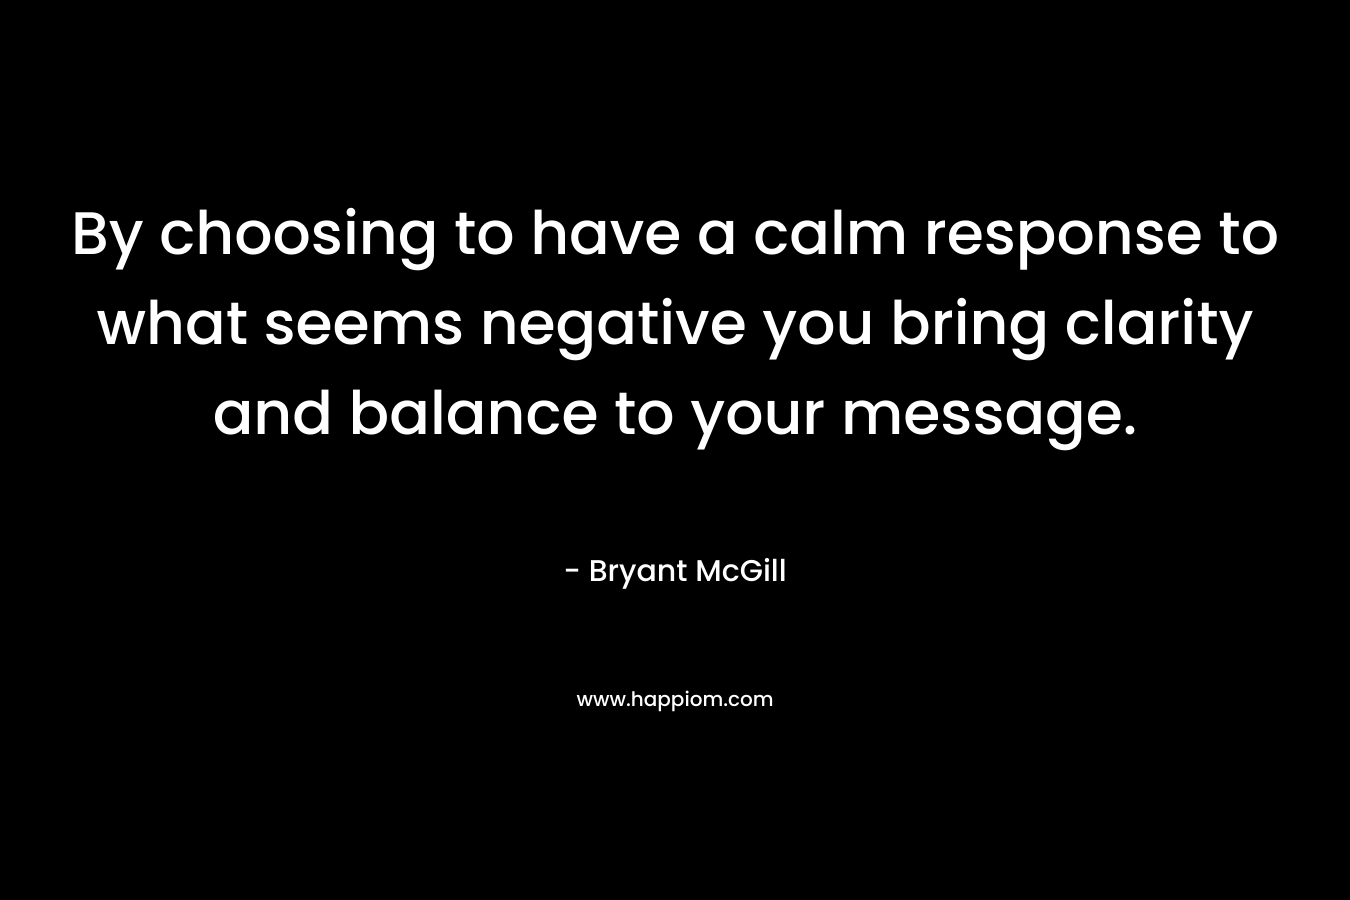 By choosing to have a calm response to what seems negative you bring clarity and balance to your message.